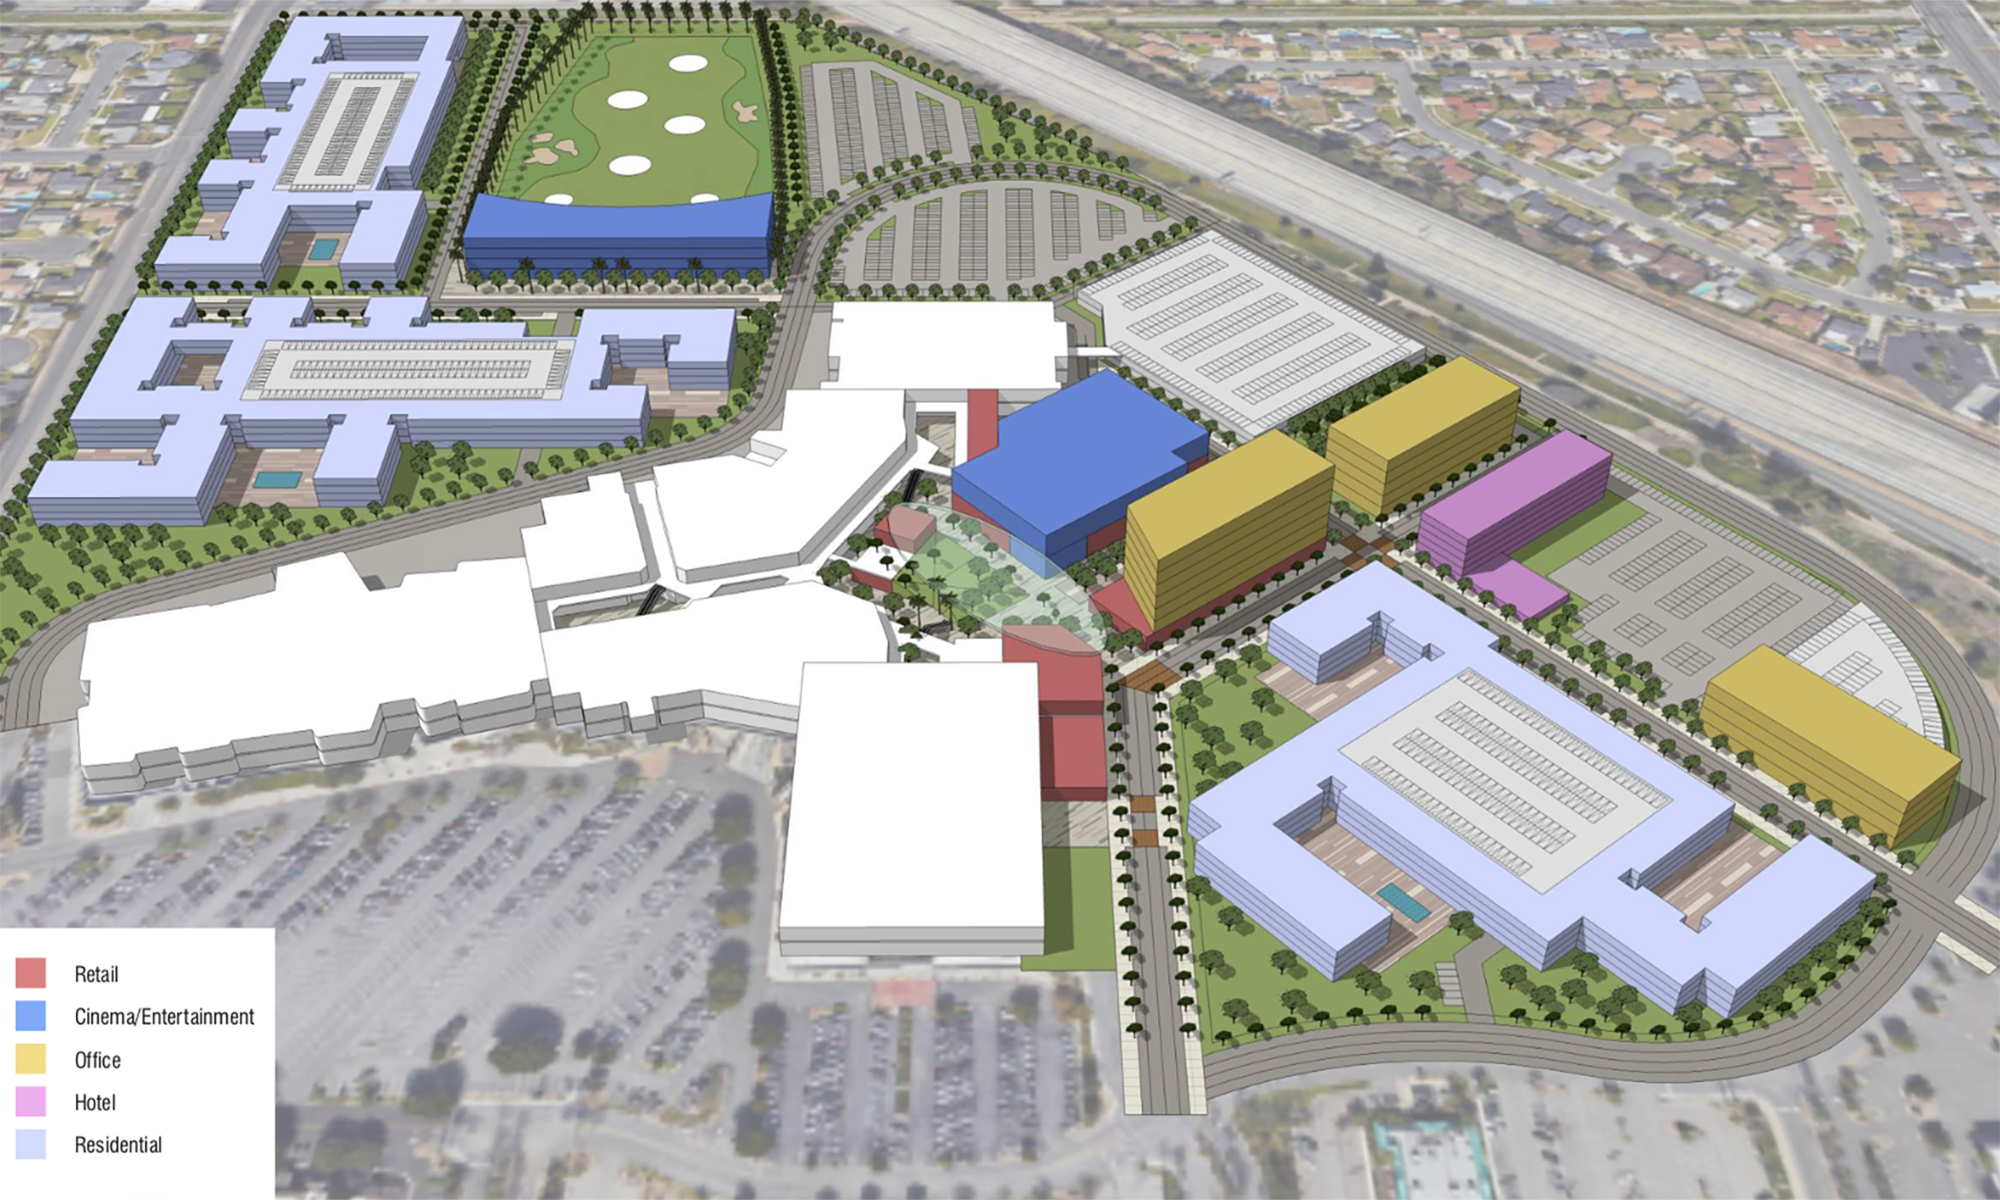 Westminster Mall's redevelopment plans include 1,100 homes